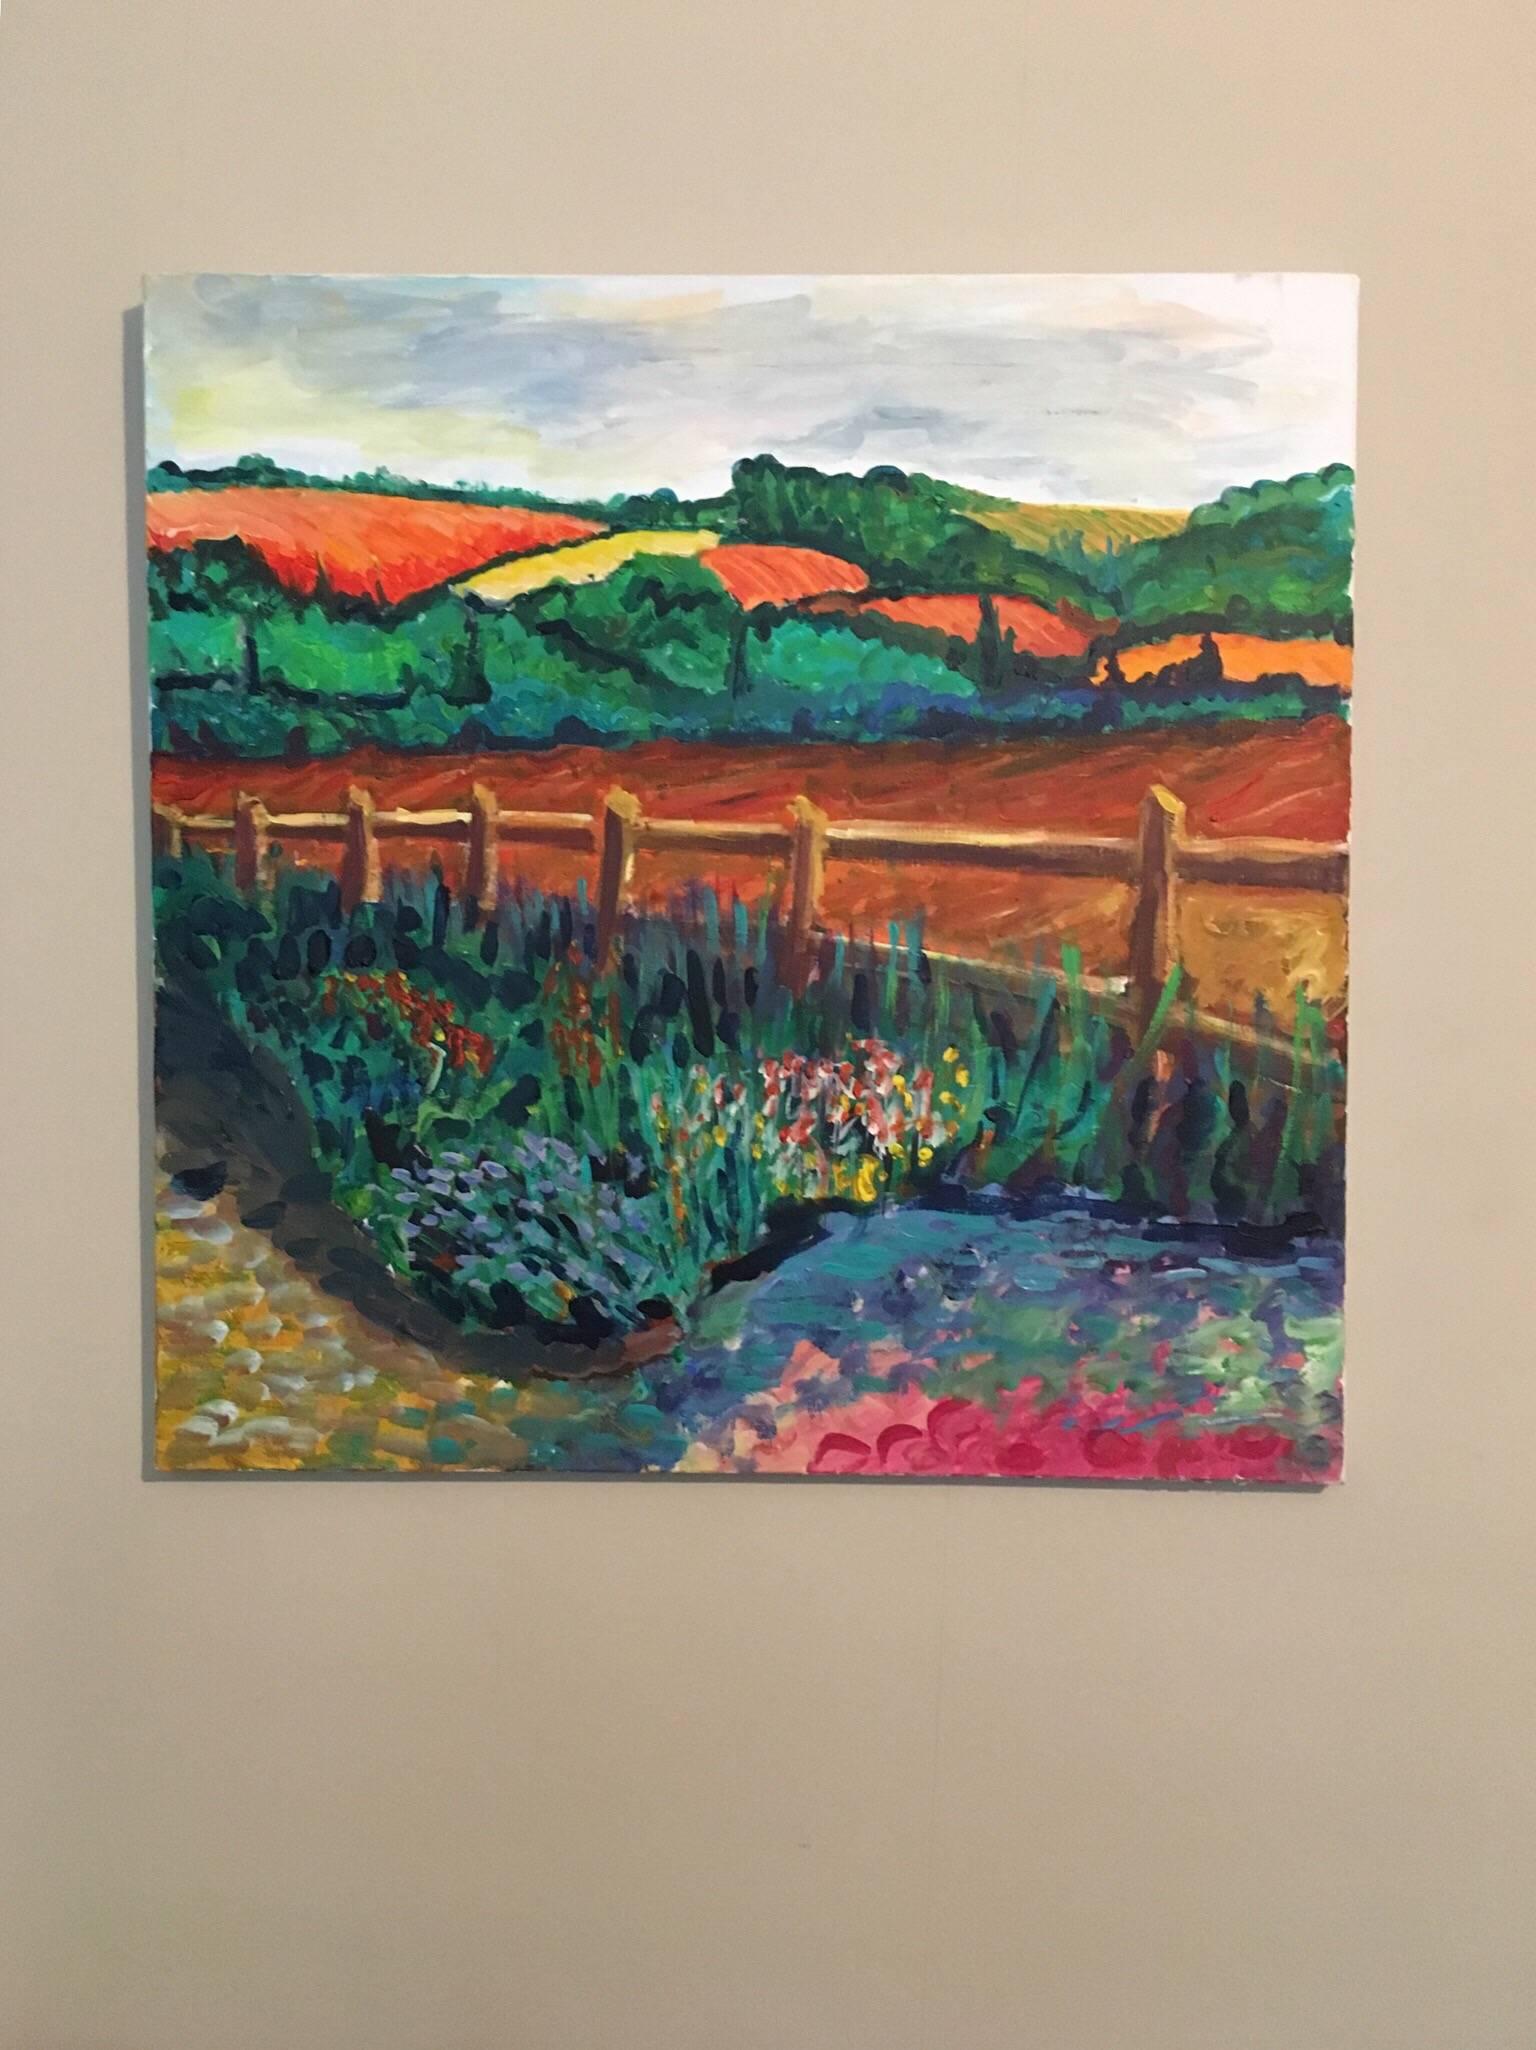 Rolling Fields, Colourful Landscape, British Artist - Painting by Pamela Cawley